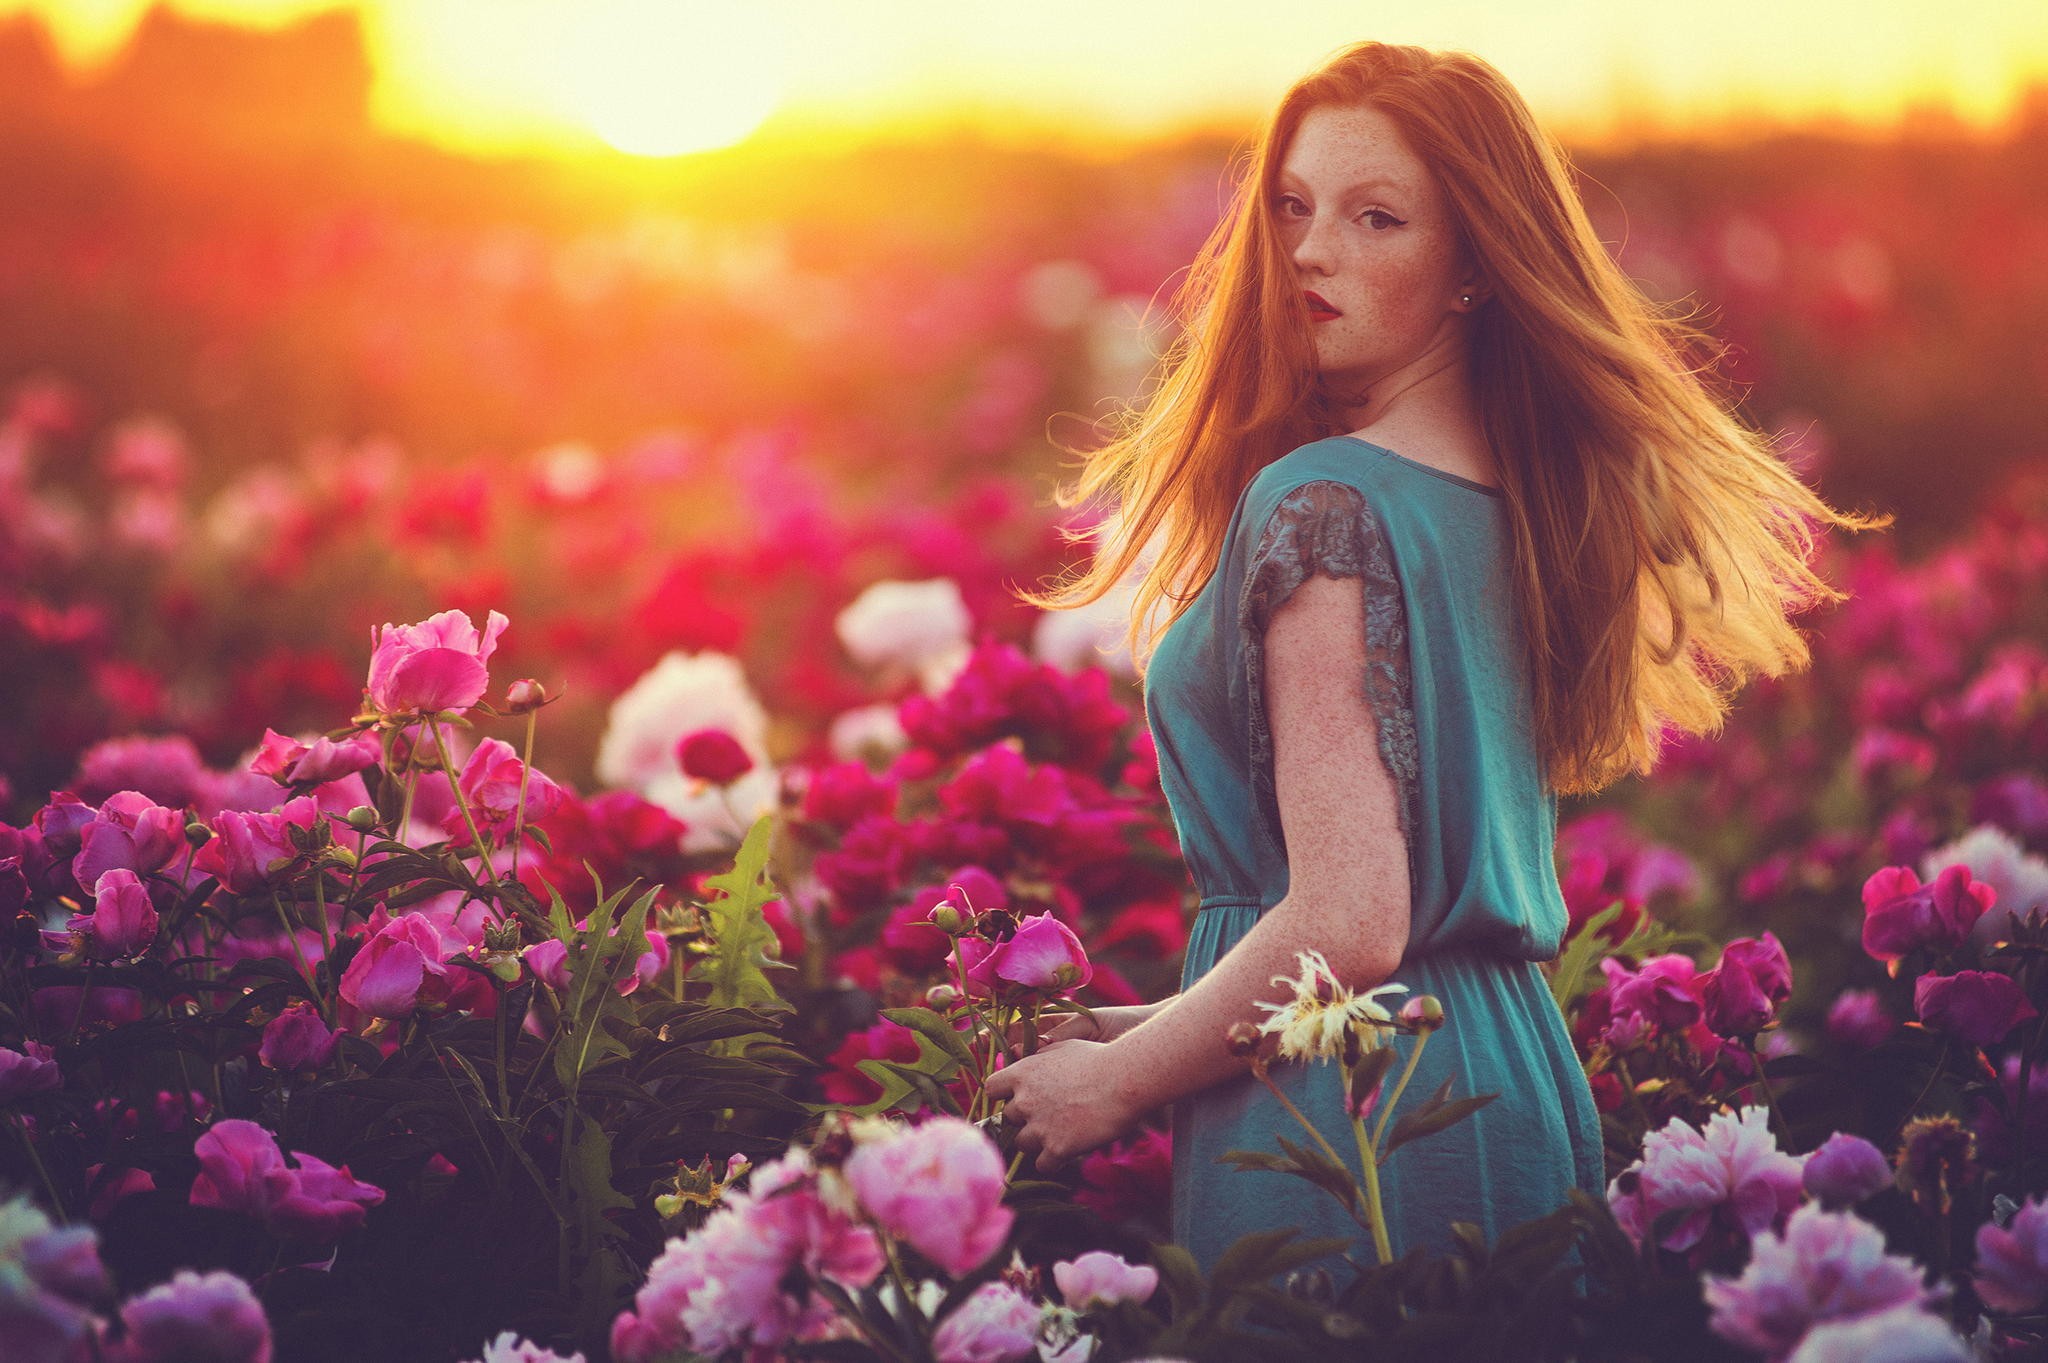 Photography Women Model Looking At Viewer Flowers Sunlight Redhead Purple Flowers Red Flowers White  2048x1363